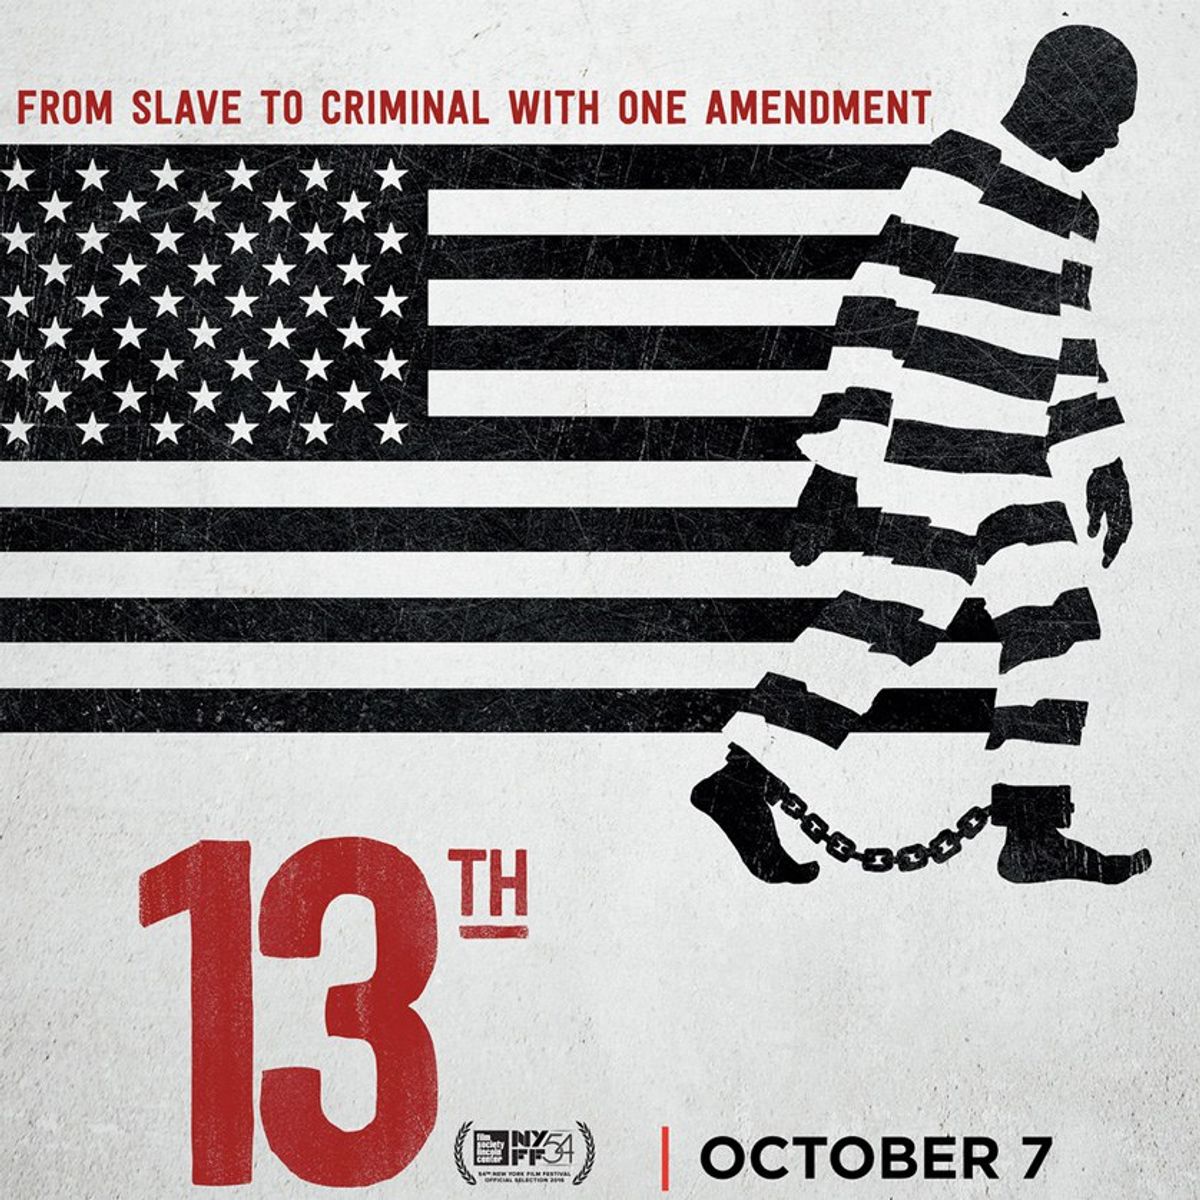 13th A Documentary about African American Vigilance